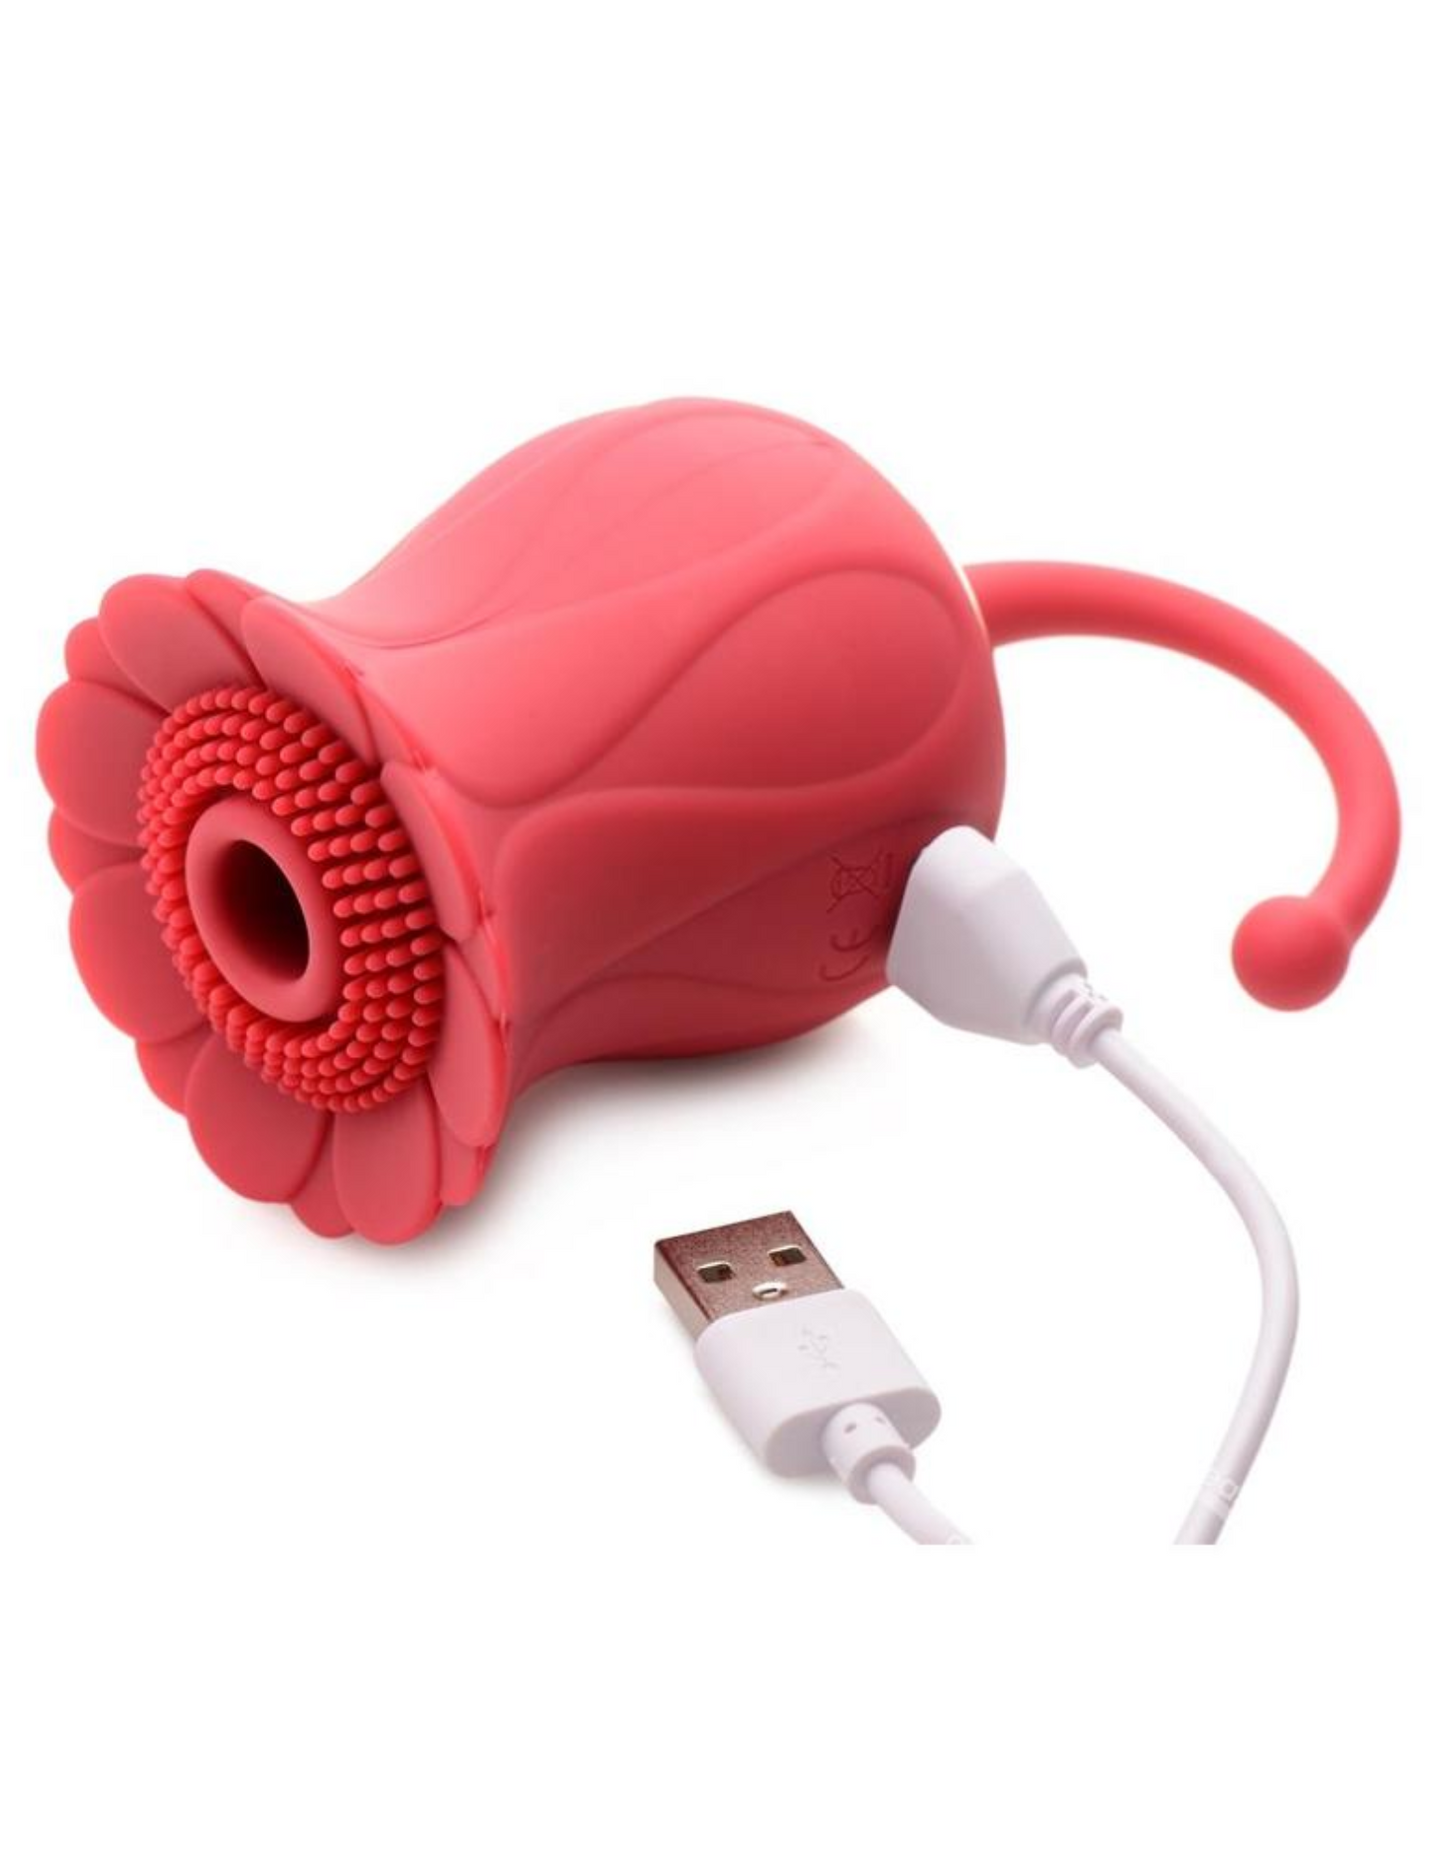 Close-up of the USB charging cord connected to the Bloomgasm Royalty Rose Clit Stimulator from XR Brands.